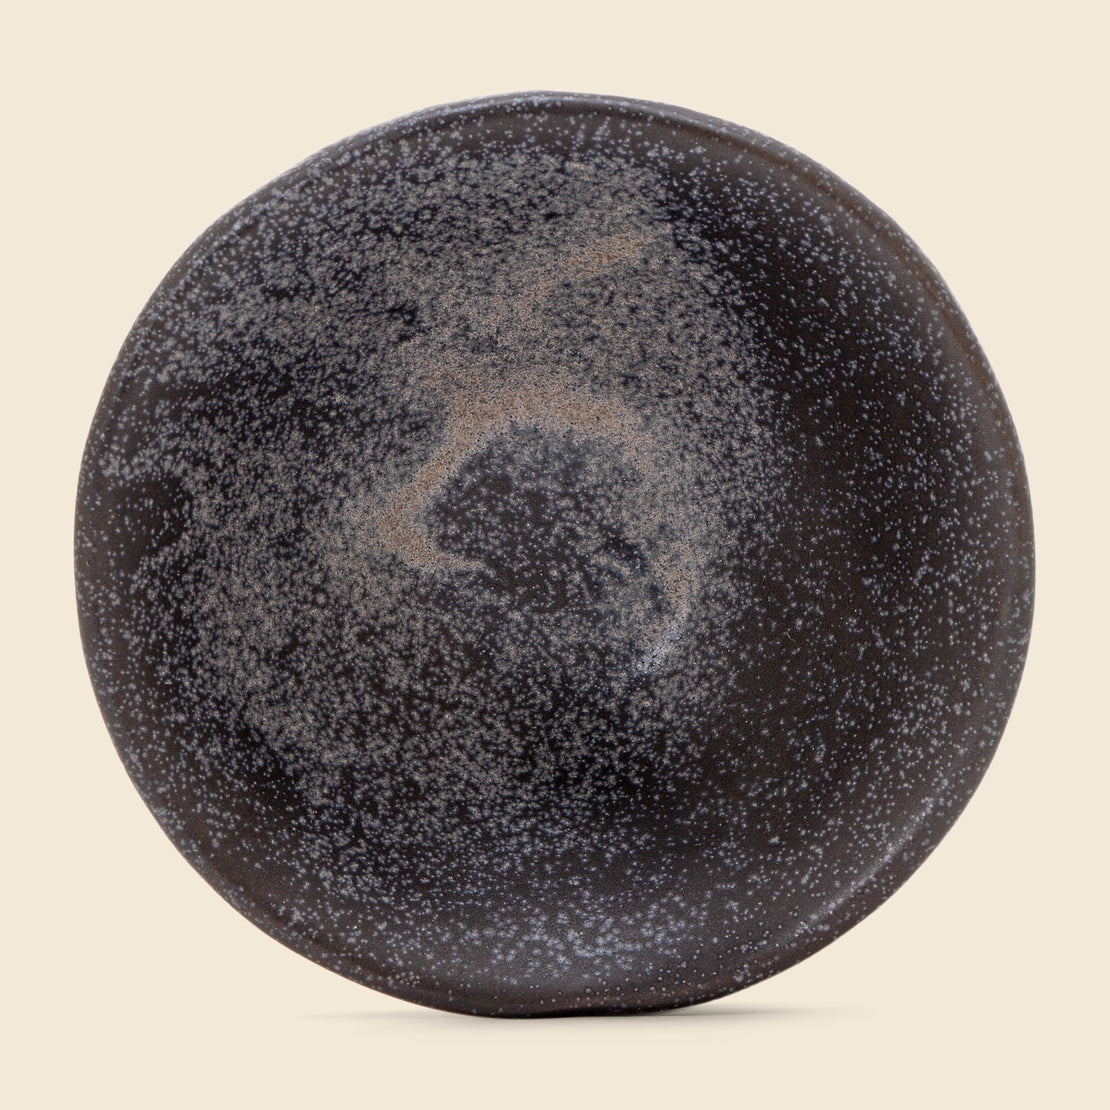 Black Stoneware Pinch Bowl - Home - STAG Provisions - Home - Kitchen - Tabletop